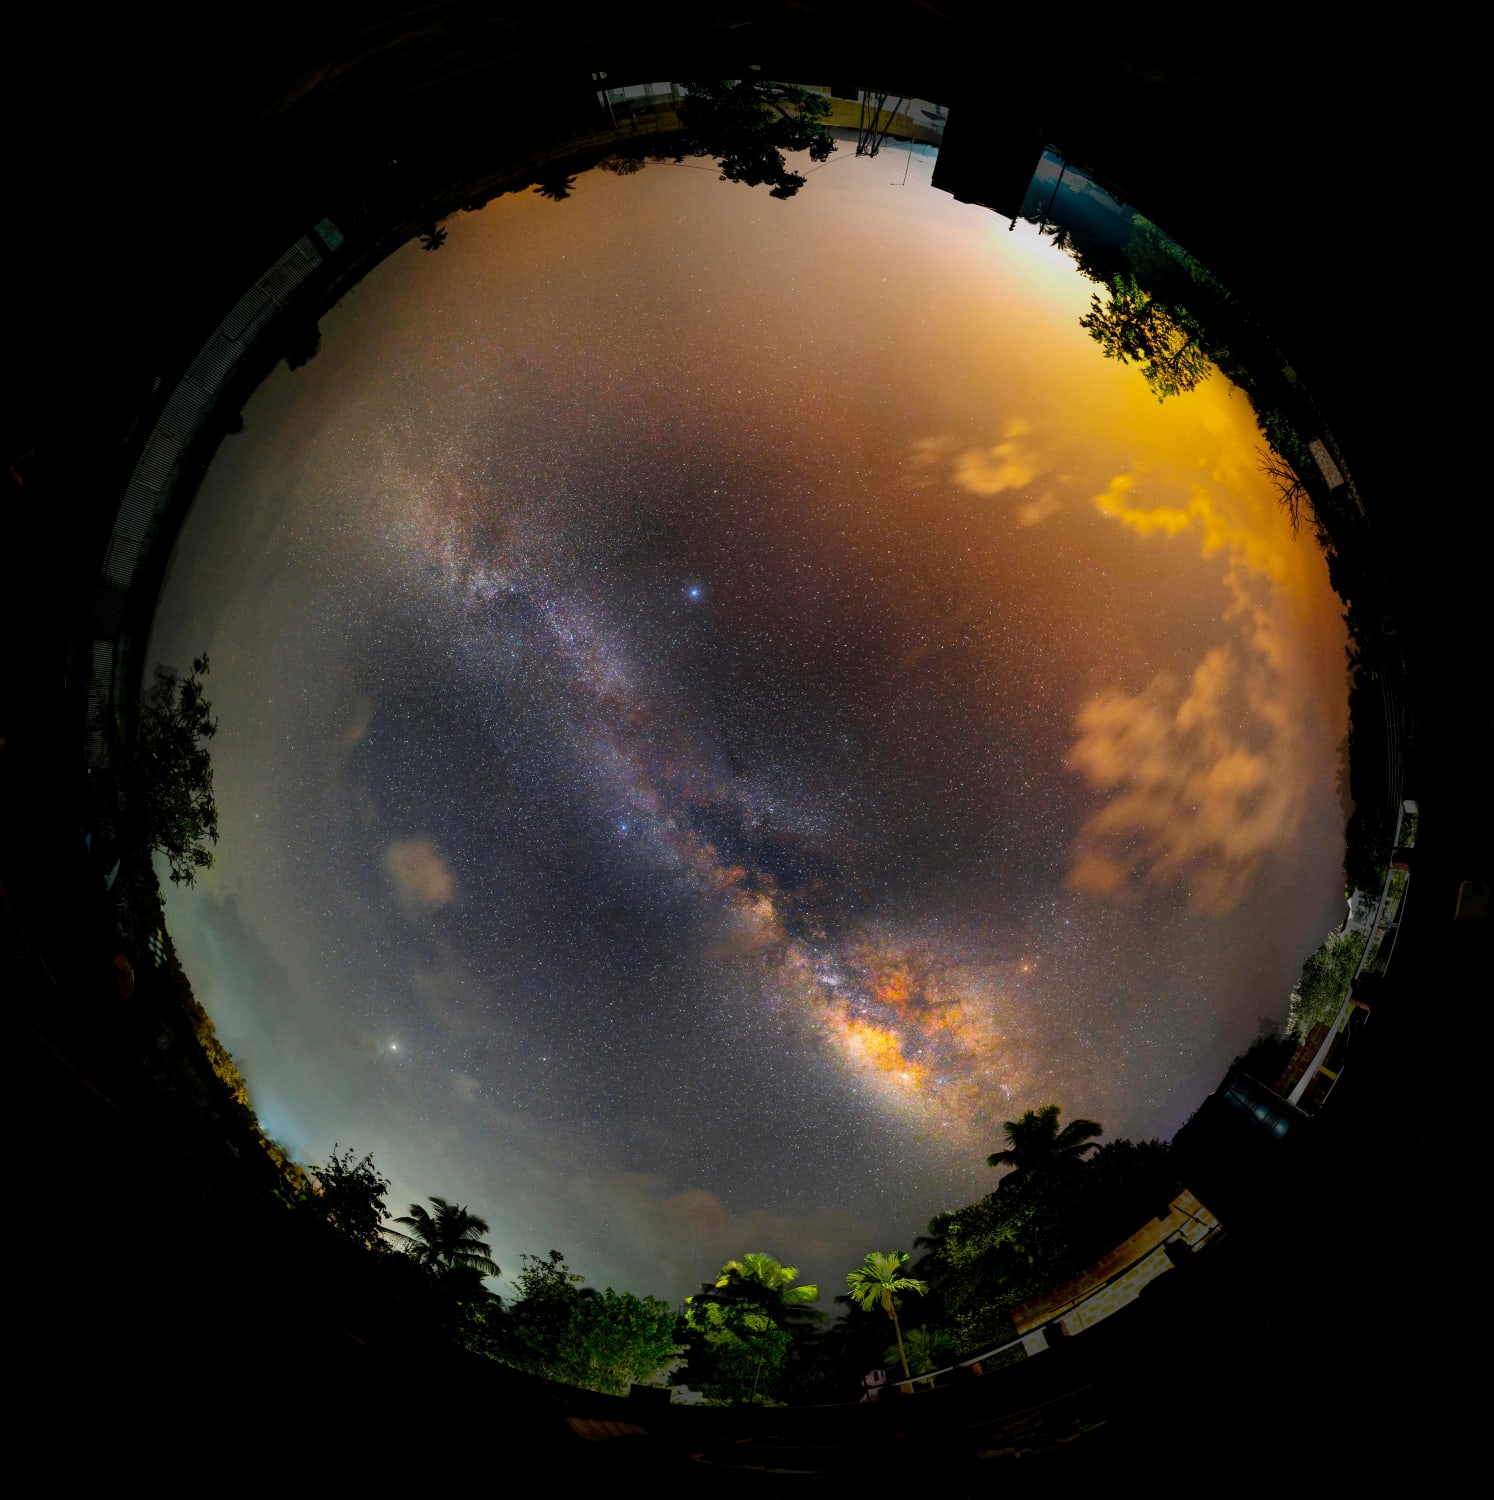 I captured a 360° Milkyway panorama last week. The full resolution image is over 600 megapixels!